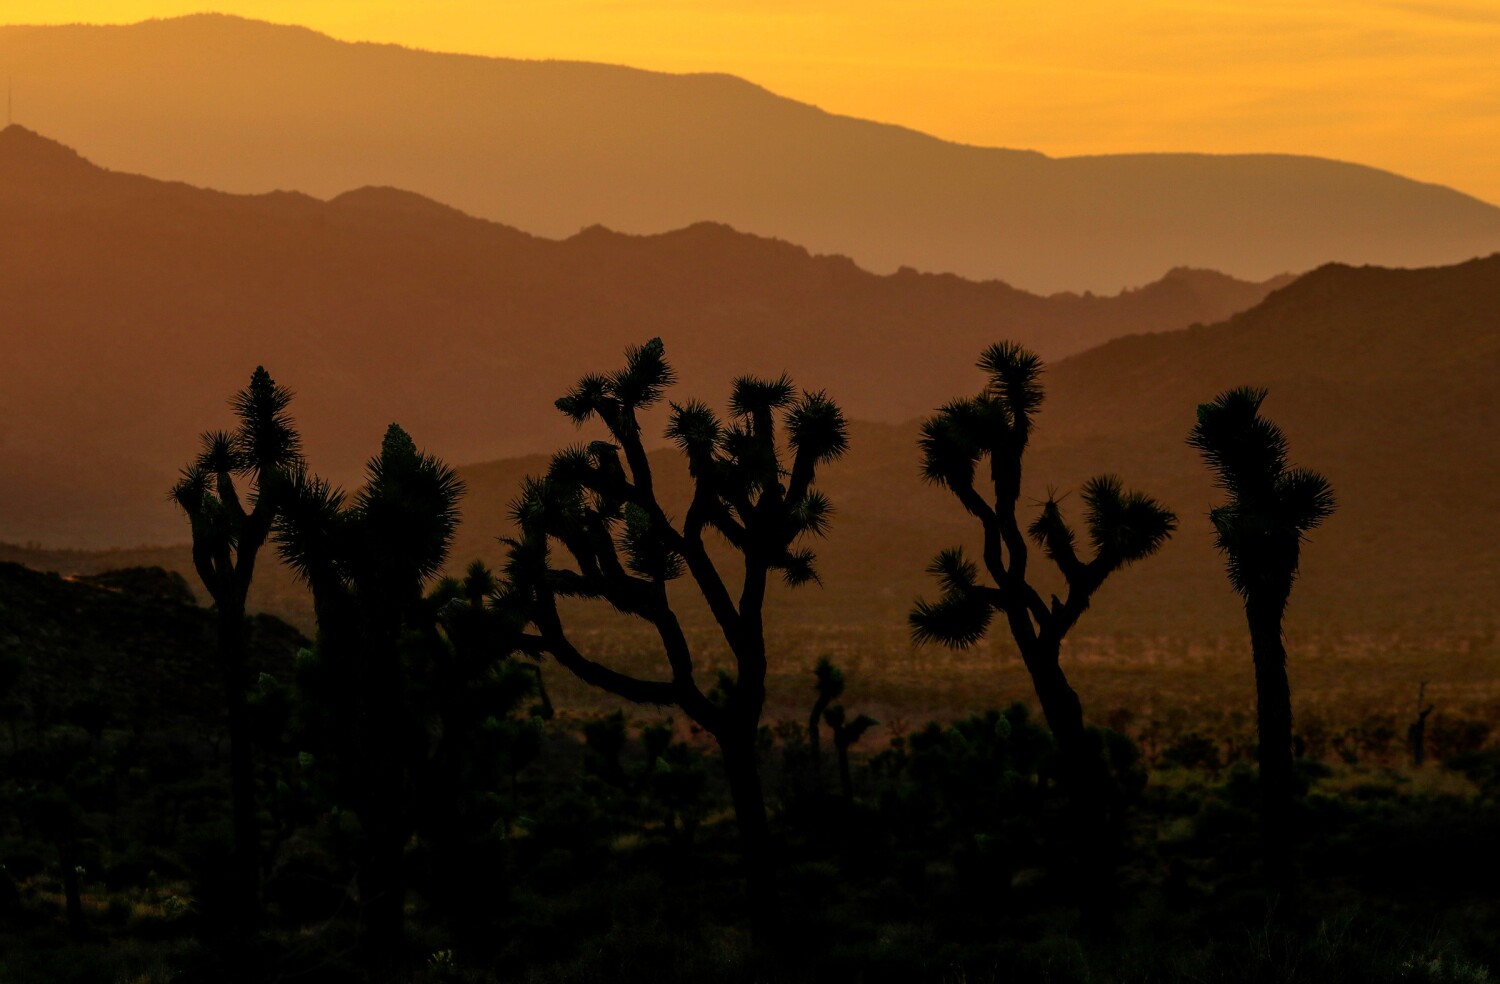 Stealing a Joshua tree could now cost you $20,000 in San Bernardino County